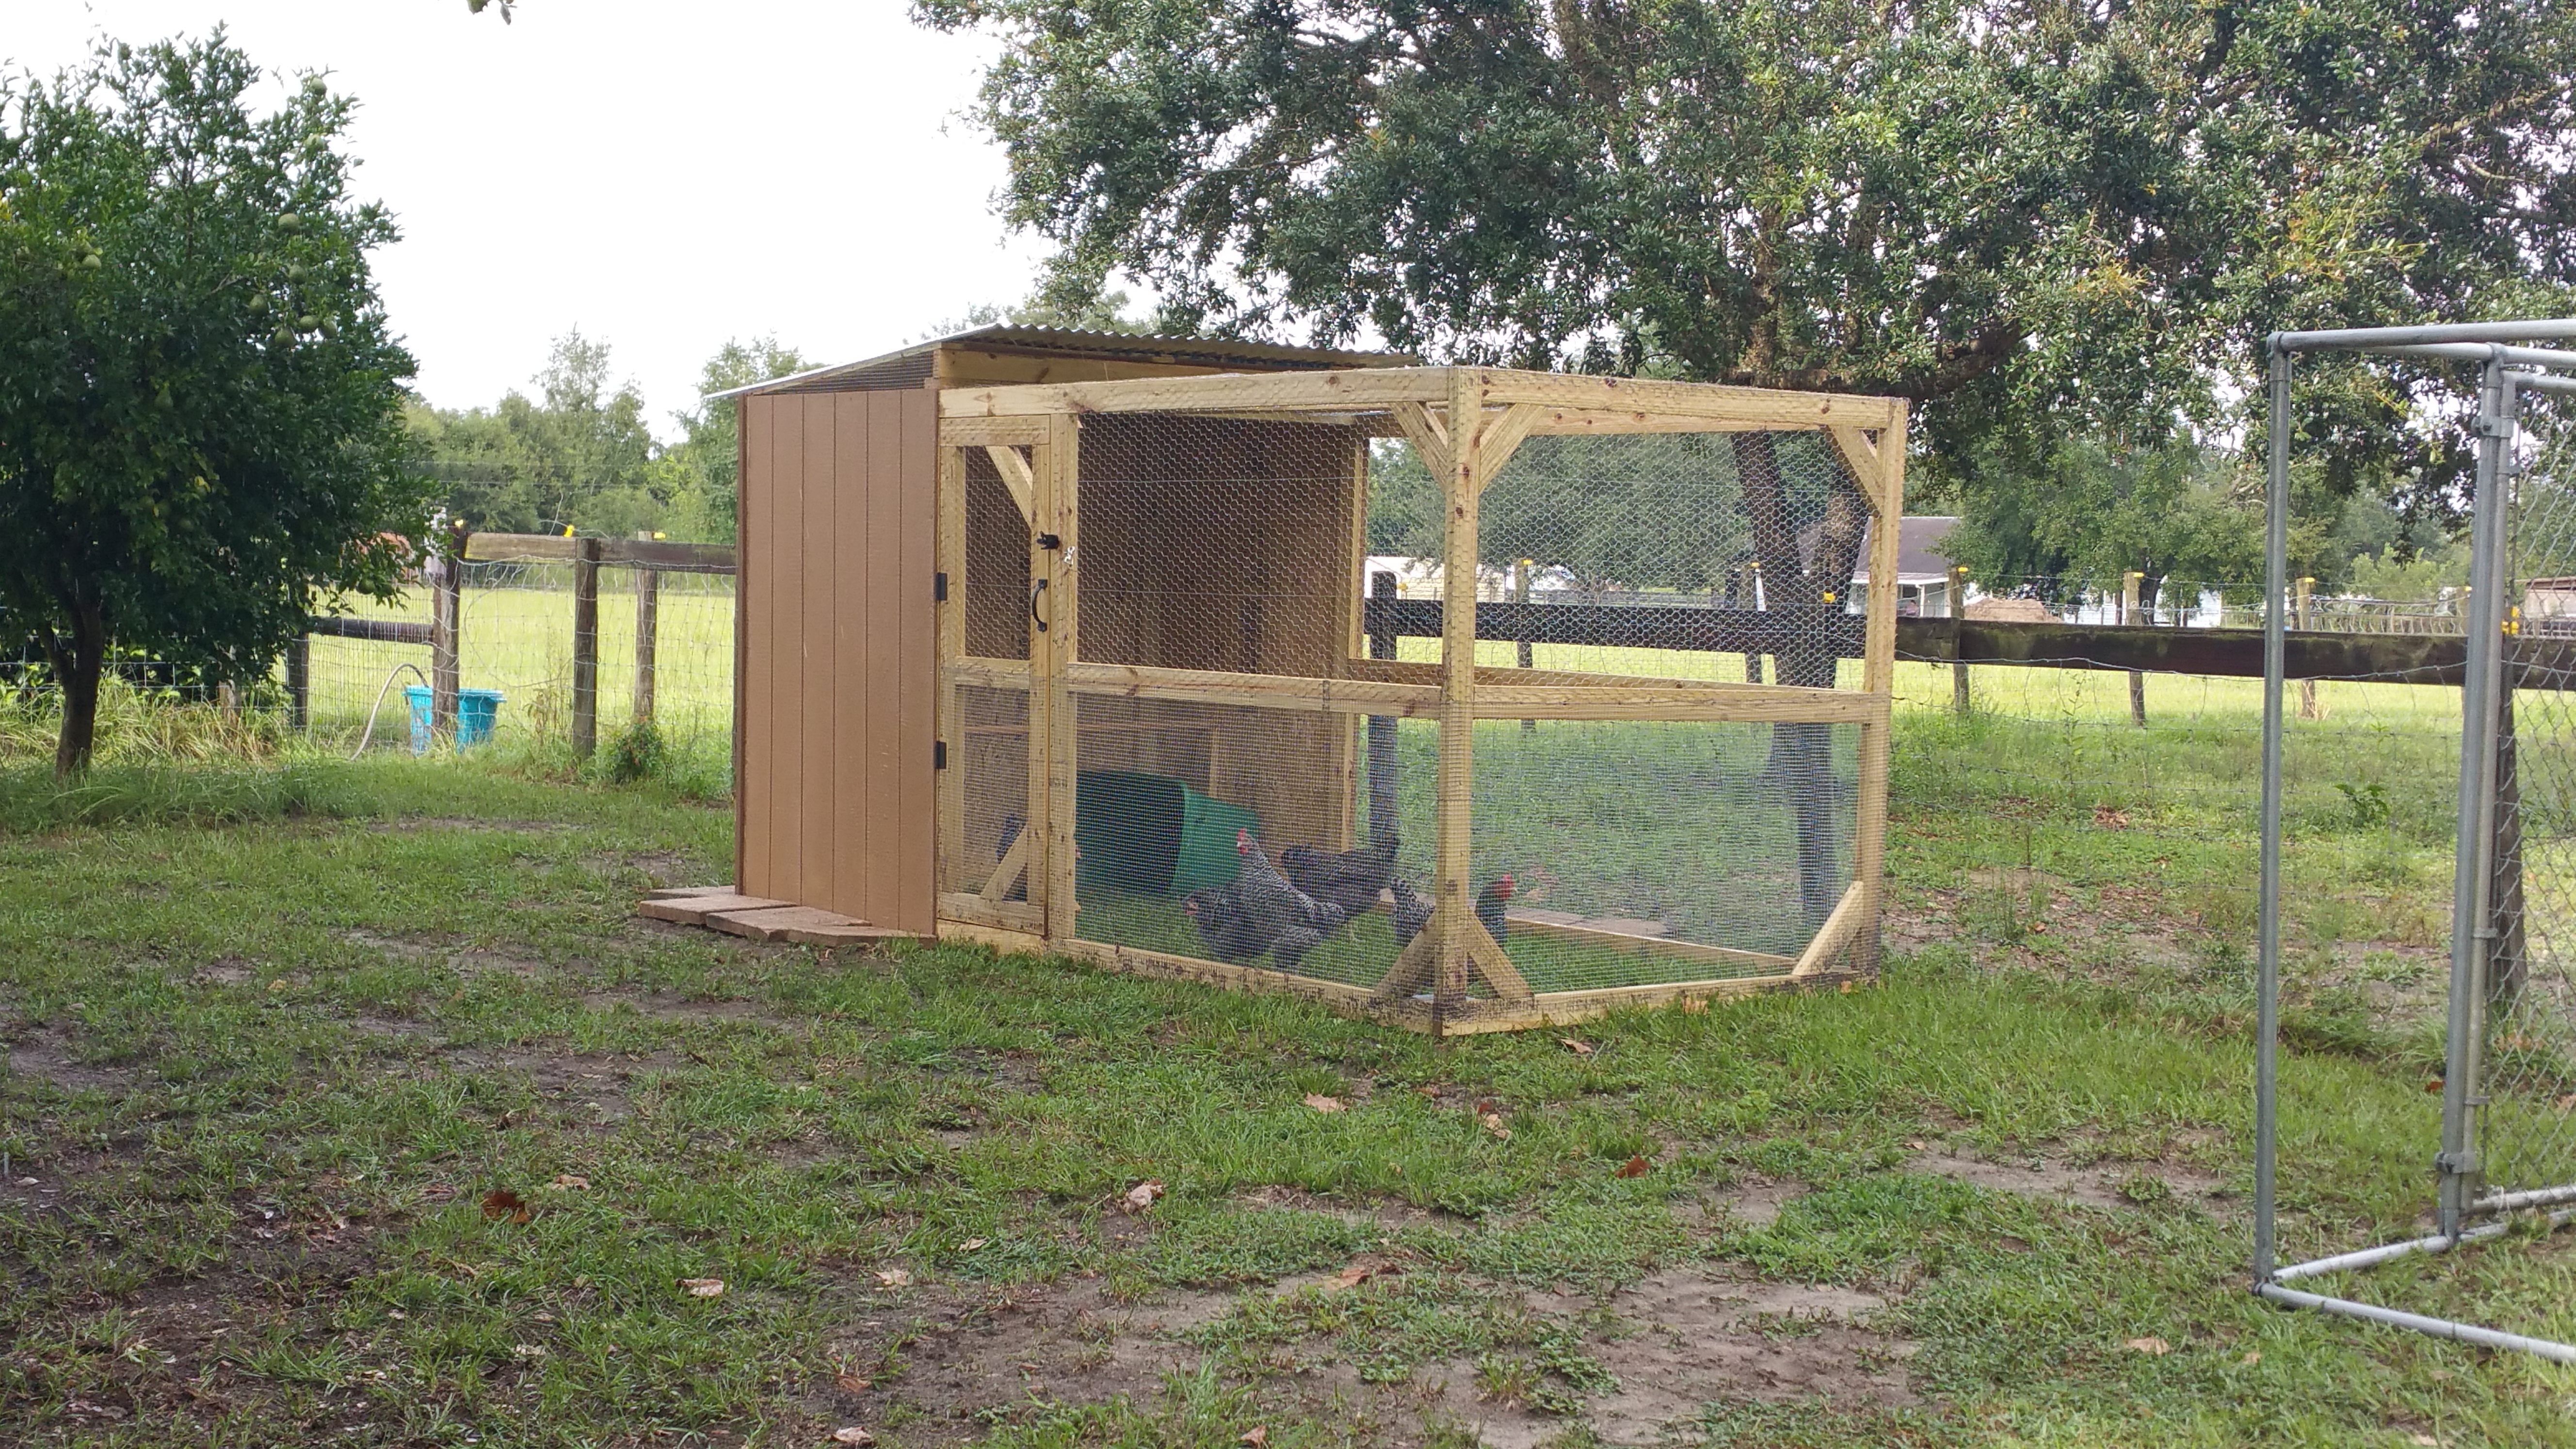 Our coop is still in progress of being completed, nest box is almost finished, the front of the enclosed part has been almost completely closed in since this photo was taken, a PVC feeder has been installed inside and a 2x4 roost, another to be added later once we are finished working inside the coop.  Electric wire will also surround the coop along with a wire apron, right now we have a temporary apron around it. An automatic waterer has been ordered along with colored leg bands for the hens and 1,000 live meal worms to start a mealworm colony. Fodder system to be created in the future. Chickens will be free ranged in the horse pasture, a chicken door will be installed for this purpose later.